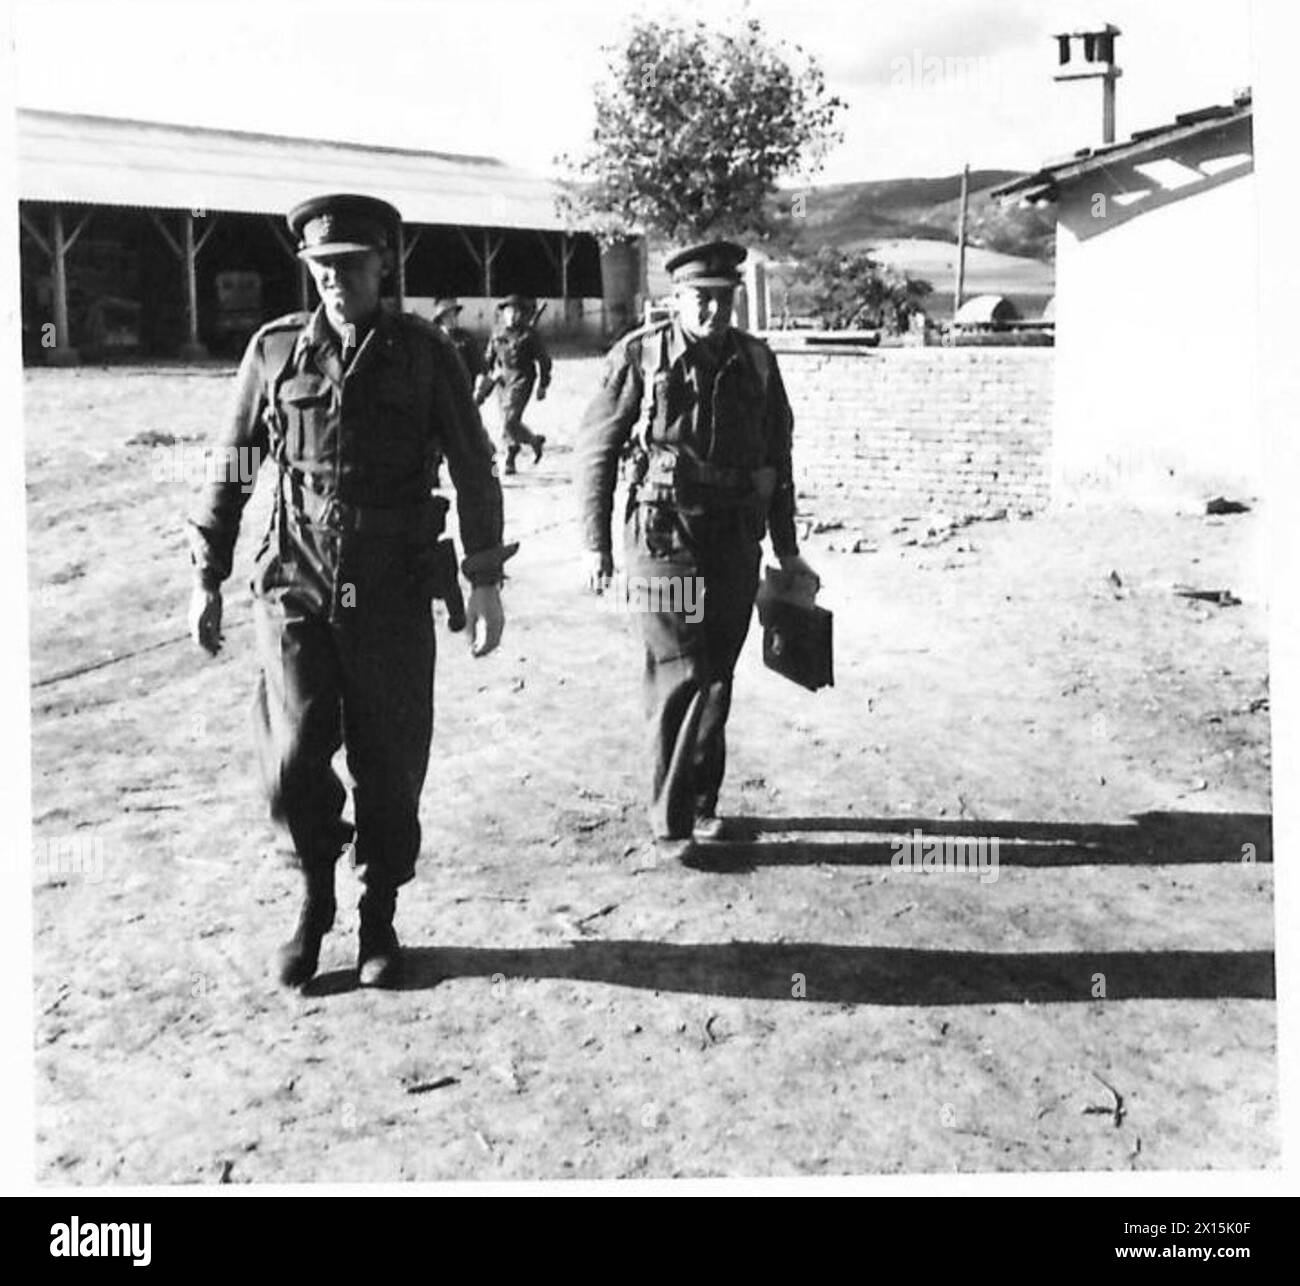 THE TUNISIA CAMPAIGN, NOVEMBER 1942-MAY 1943 - Brigadier P. Pepper (left) with Captain Randolph Churchill (Winston Churchill's son) in the forward area, 5 December 1942. The British First Army was met with stubborn resistance in the operations in North-East Tunisia, where the enemy brought considerable reinforcements. The Allied armies, however, were moving up into position, despite many difficulties caused by bad weather and, according to reports, were a month ahead of schedule at the time this photographs were taken British Army, British Army, 1st Army, Churchill, Randolph Frederick Edward S Stock Photo